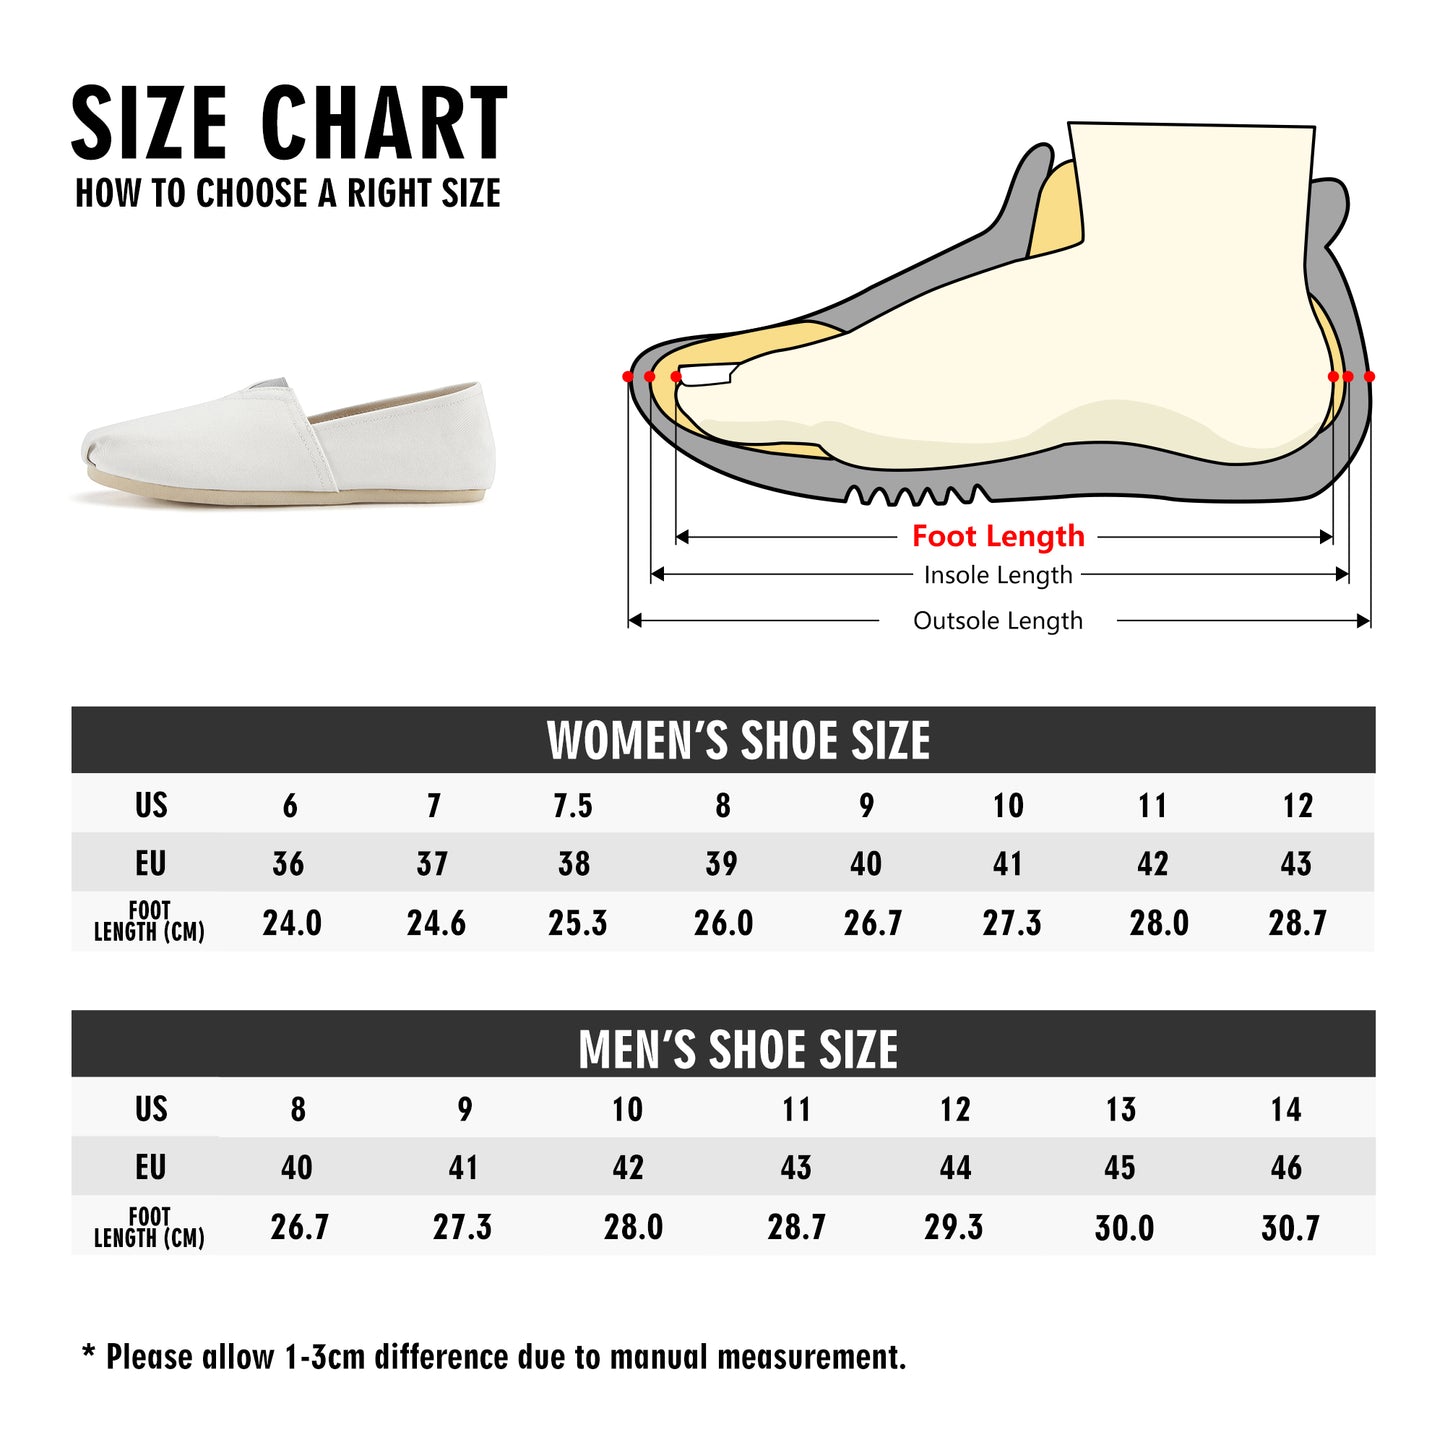 Mushrooms Womens Casual Slip-On Shoes